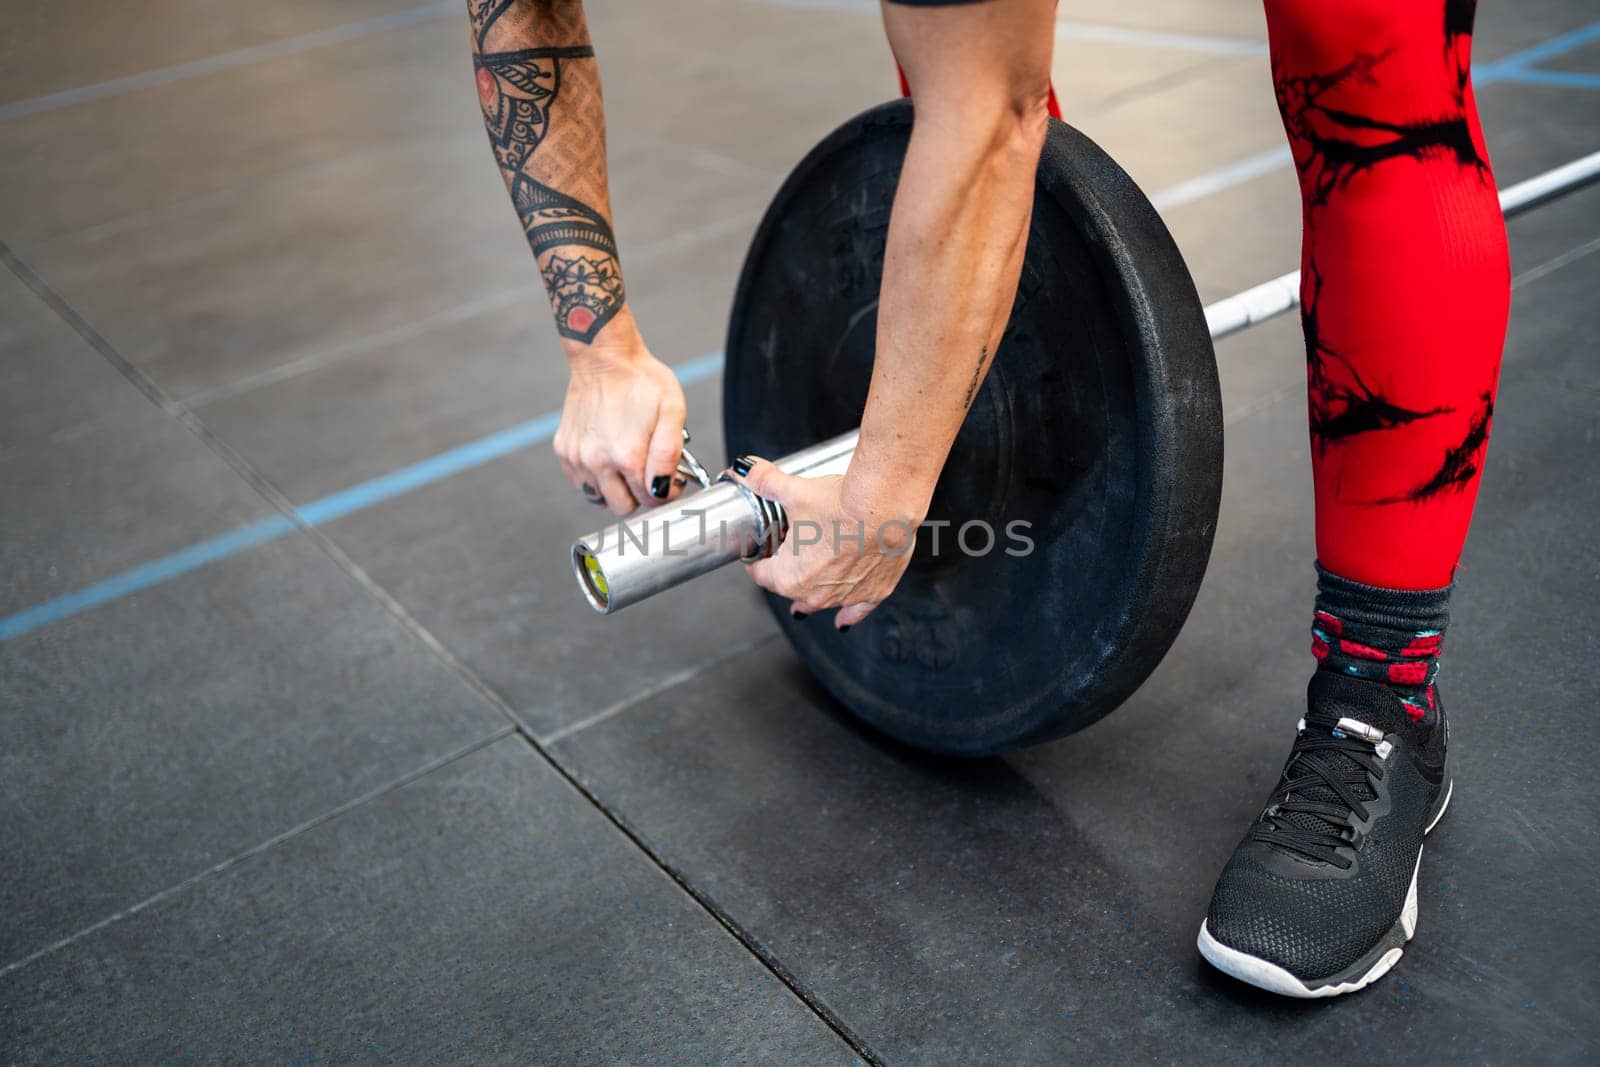 Top close-up view of a woman securing a clamp at the end of a weightlifting bar